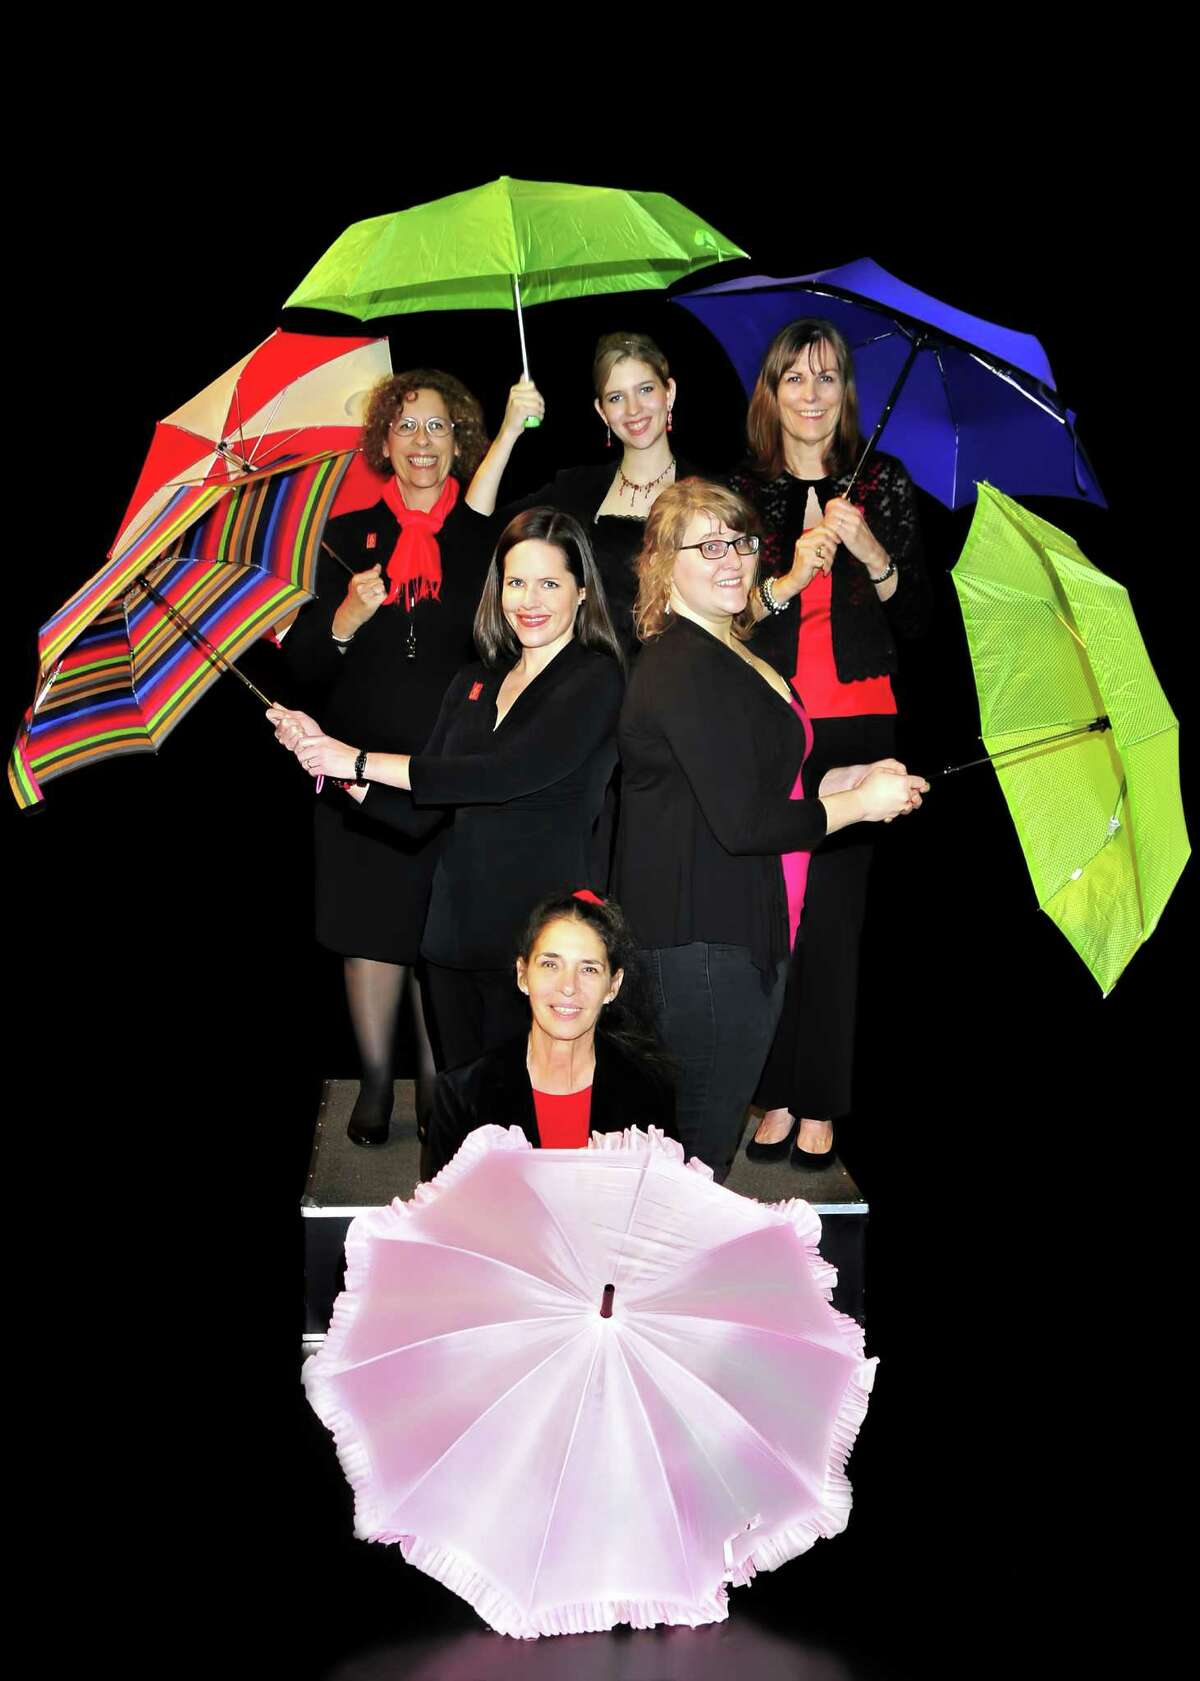 The Fort Bend Symphony brings winter's winds and rains to musical life in the new concert, "Stormy Weather." The family-friendly event is 2 p.m. Sunday, Feb. 22, in the Stafford Centre. From left front, are: Andrea Cope, percussion; Meredith Holtam, violin 2; Bethany Fast, French horn; Marty Koran, violin 2; Sarah Reimund, trumpet' and Marilyn Conger, clarinet.